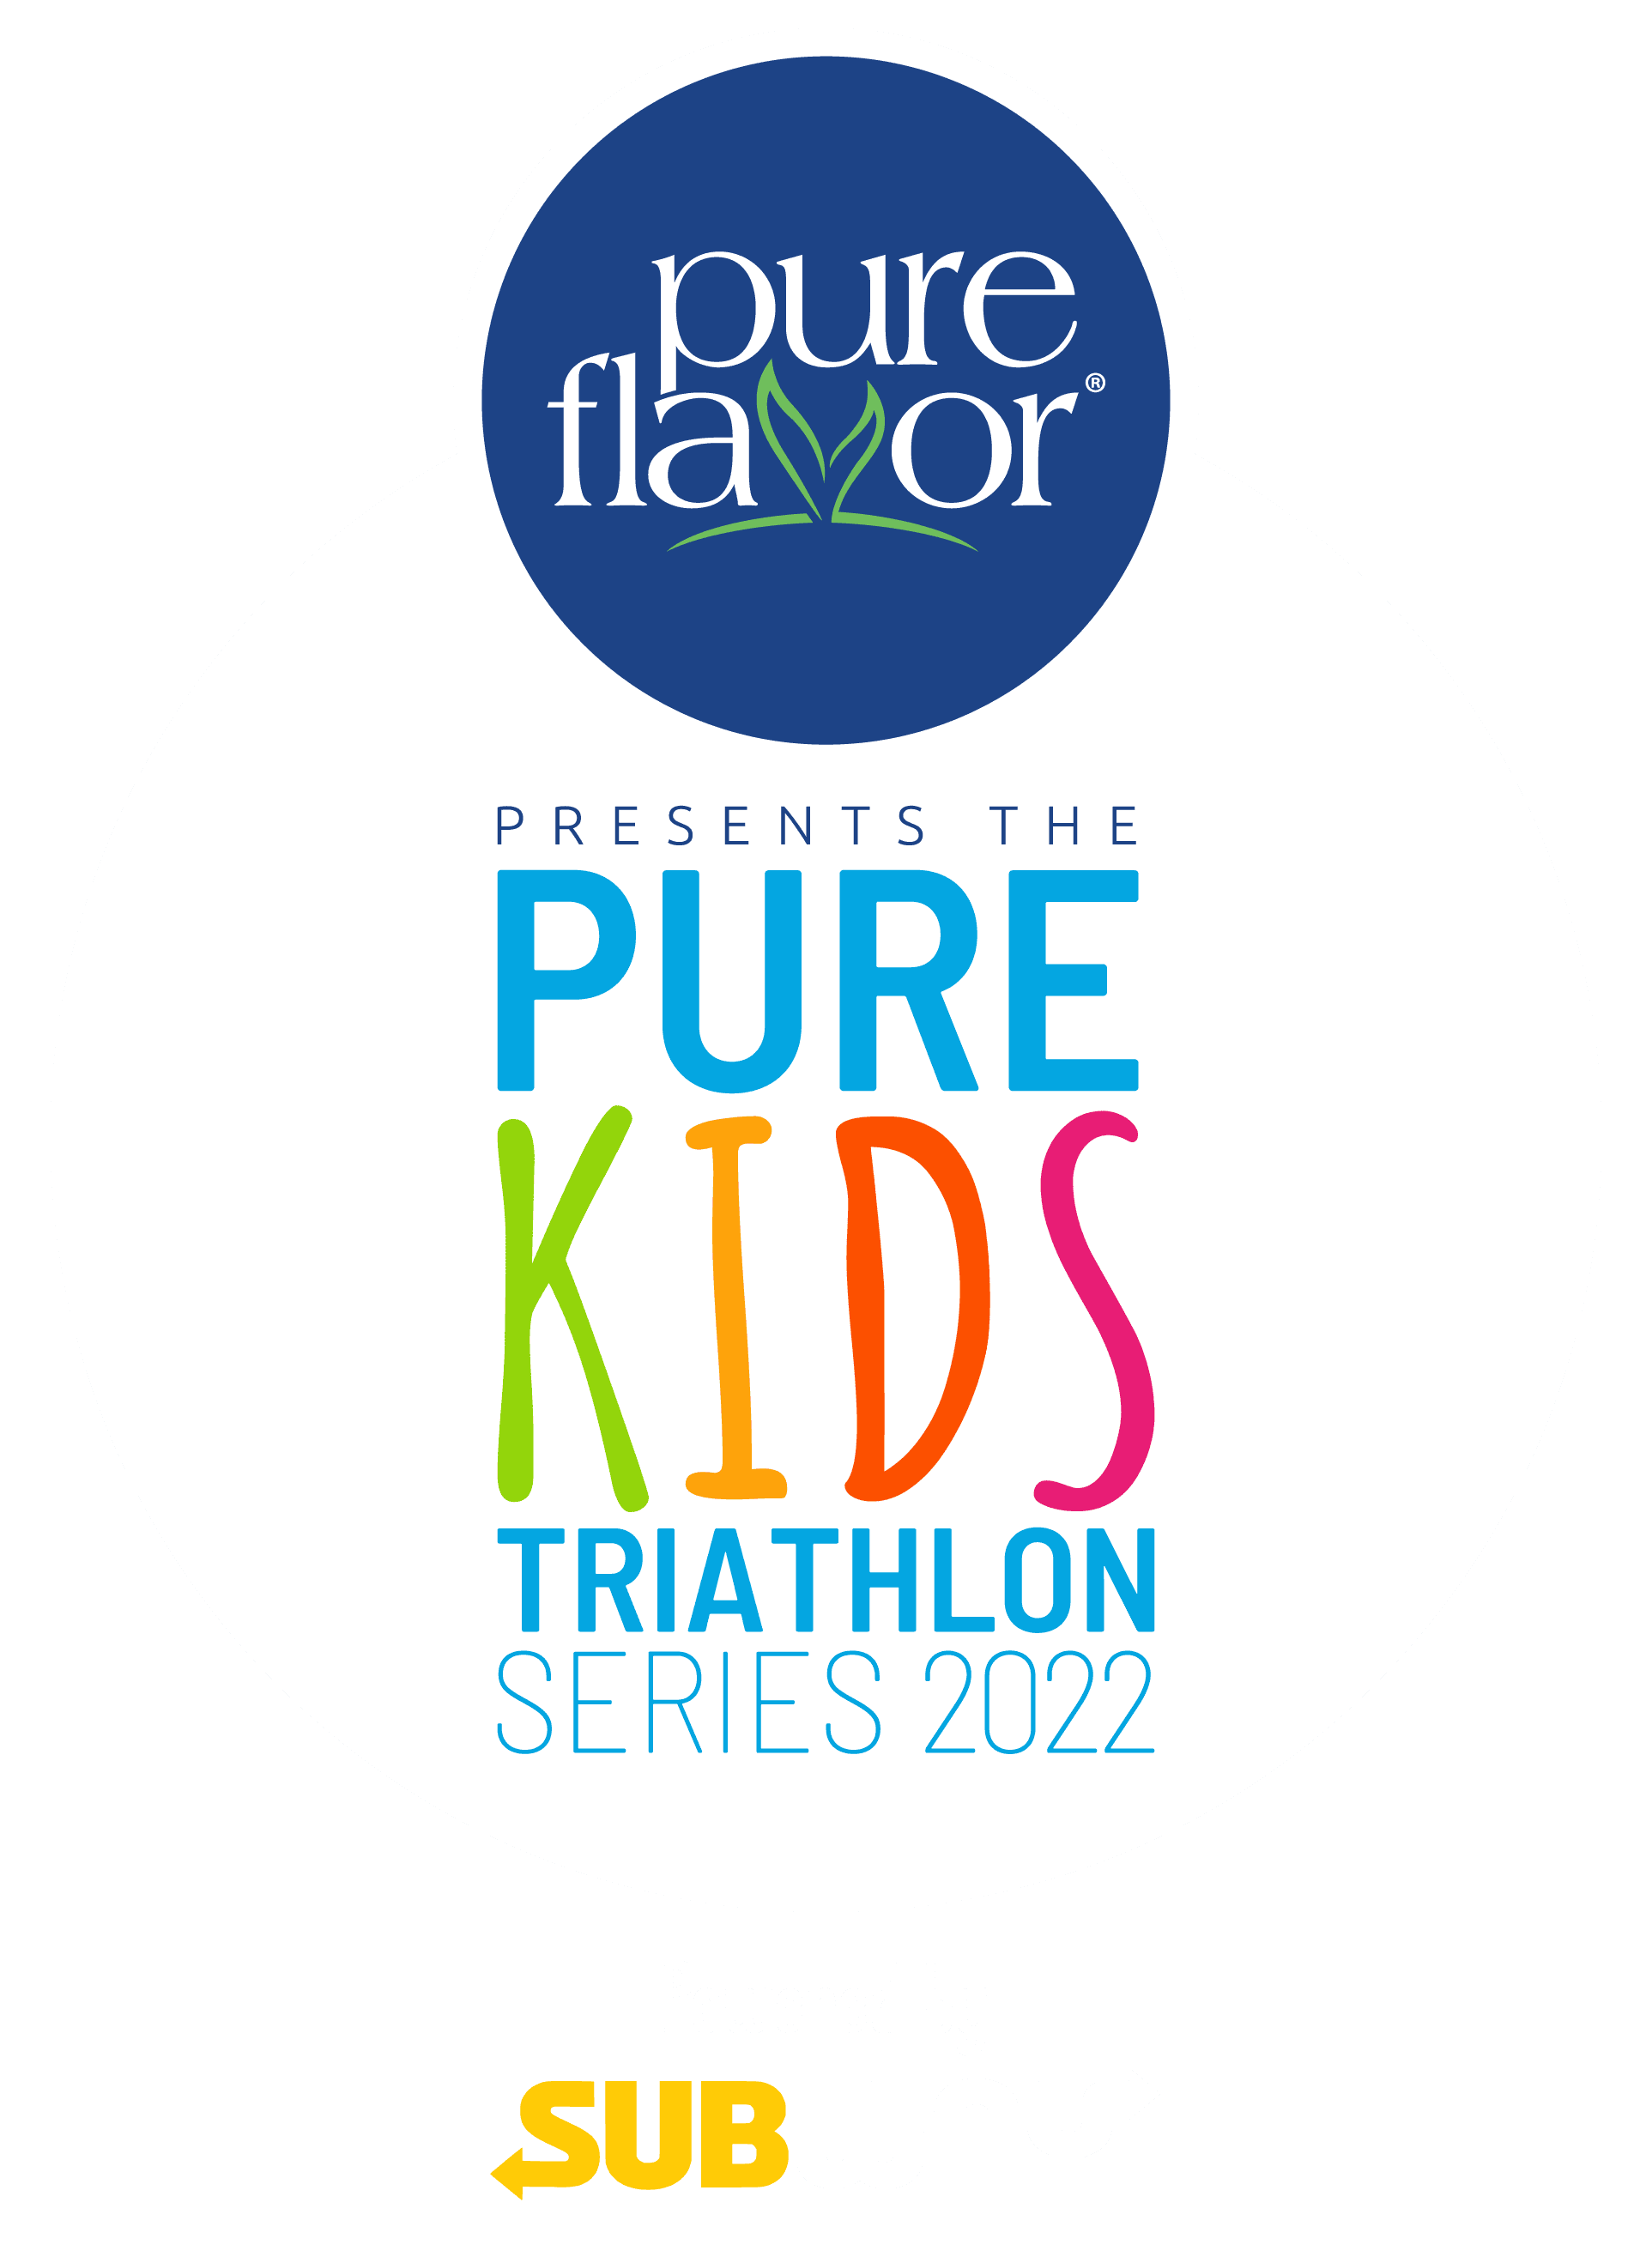 Pure Flavor® Presents the Pure Kids Triathlon Series 2022 Powered by Subway